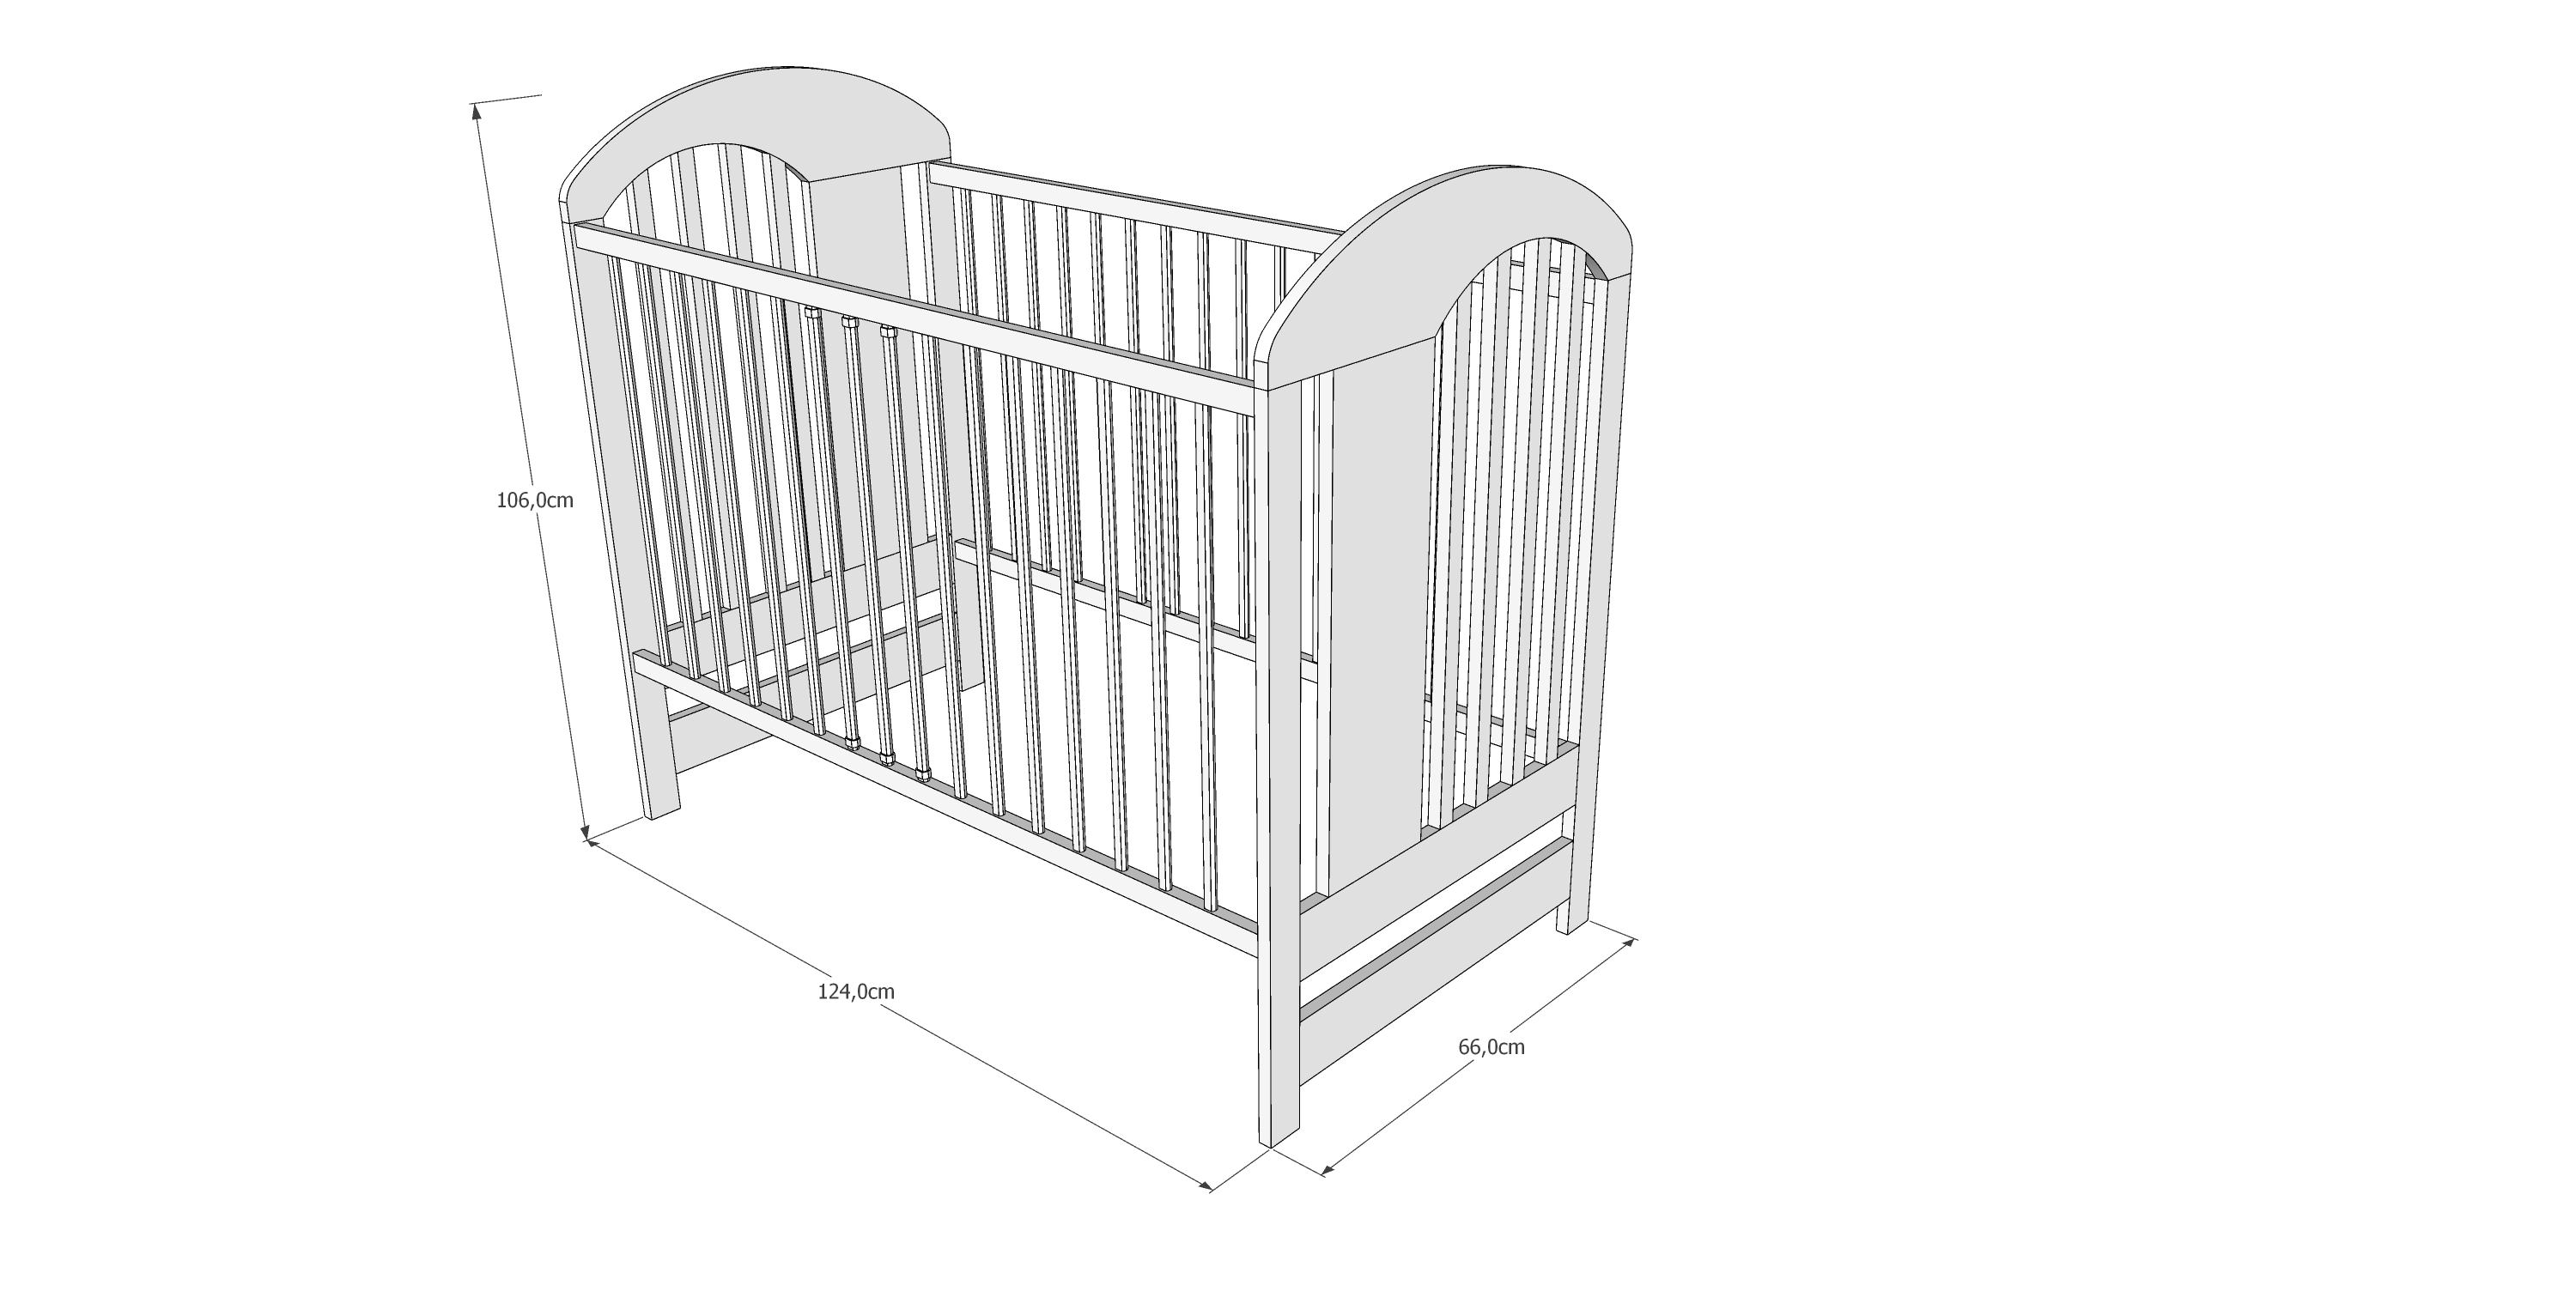 image - Just Baby Baby Cot with Drawer PUMBA  NATURAL 